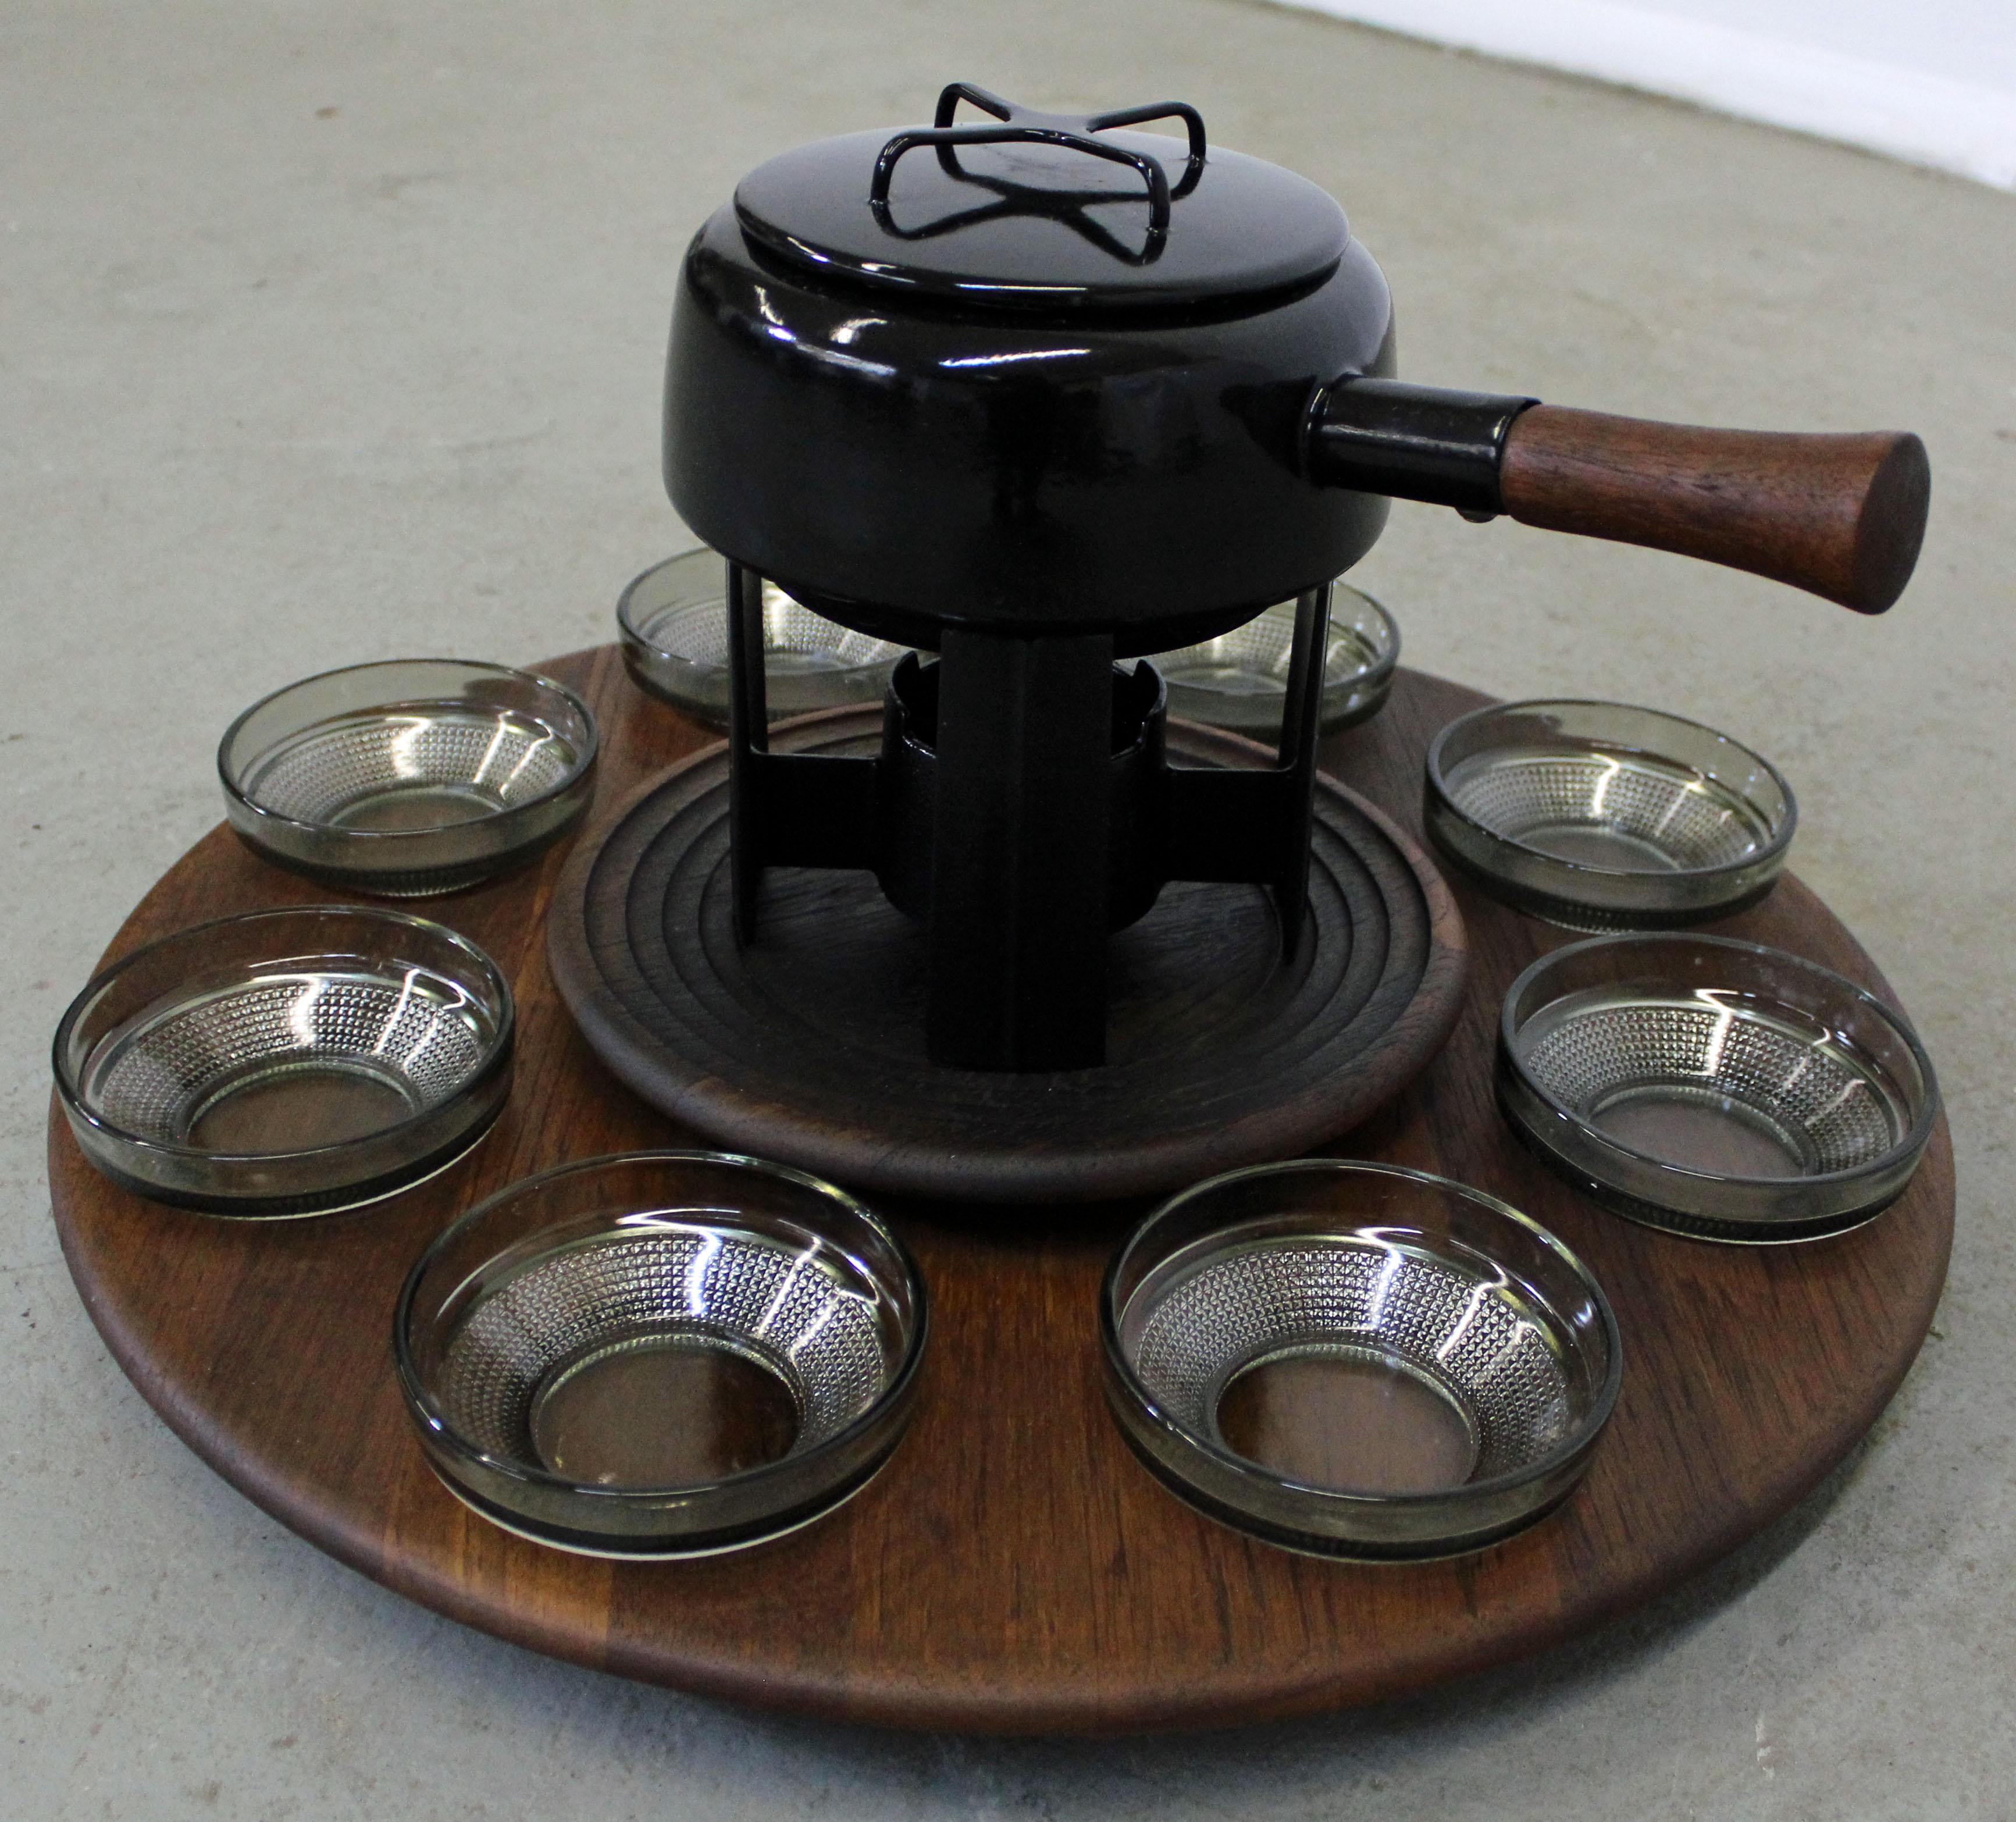 Offered is a Danish modern teak fondue set, designed by Jens Quistgaard for Dismed circa 1964. Includes a teak server with a lazy susan, eight glass bowls, enameled fondue pot, and cast iron warmer. It is in very good condition for its age, shows